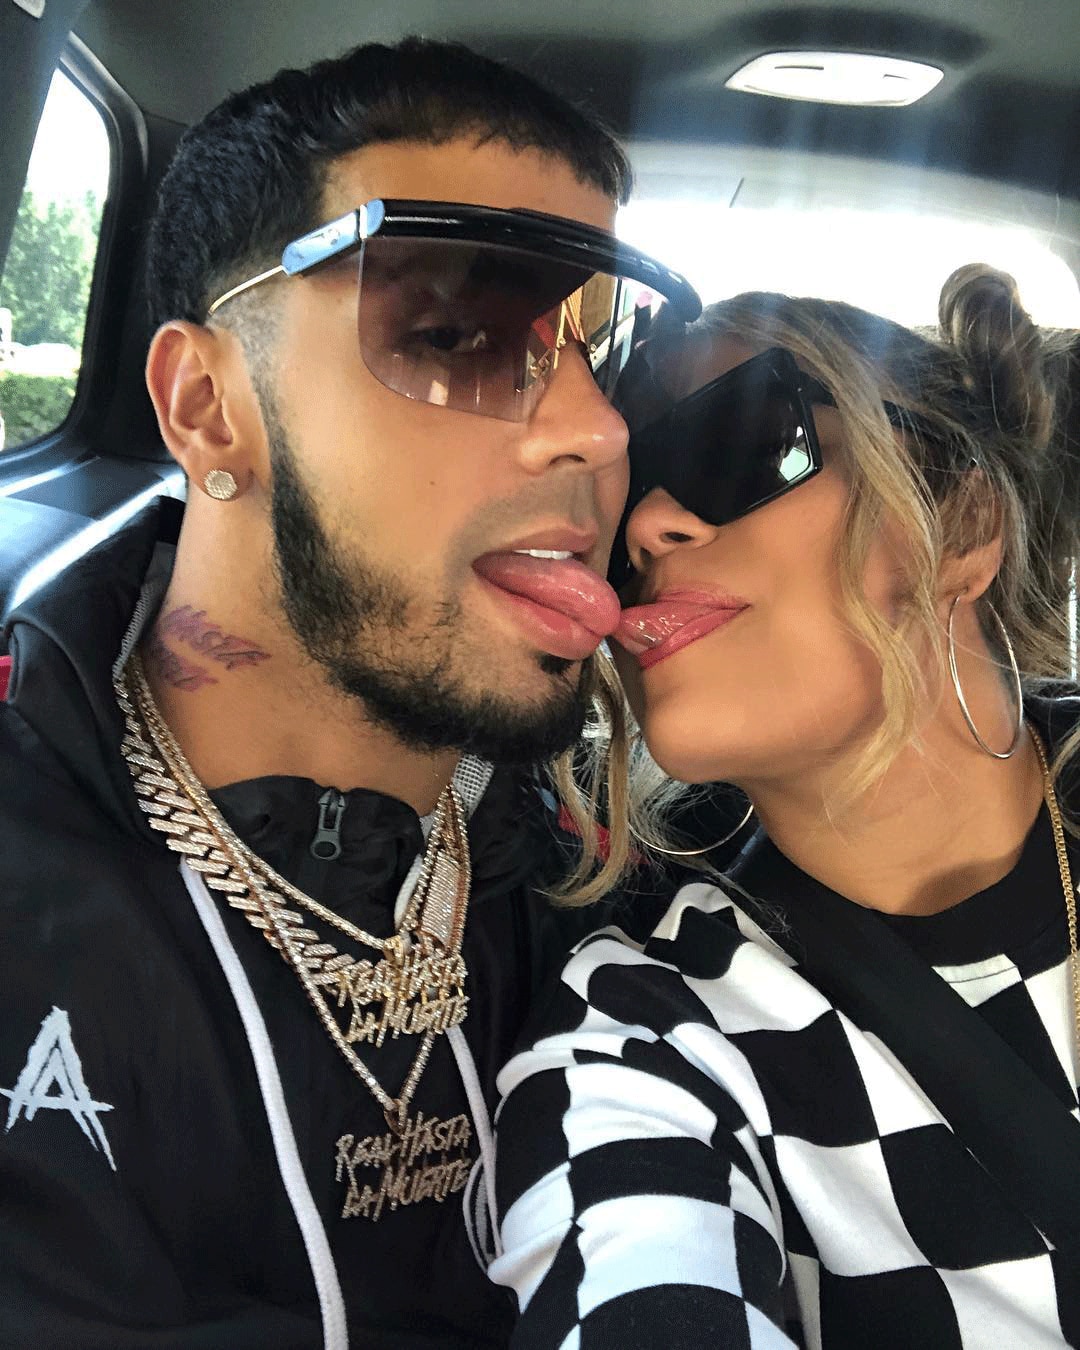 Tongue Tied From Anuel Aa And Karol Gs Cutest Couple Moments E News Uk 